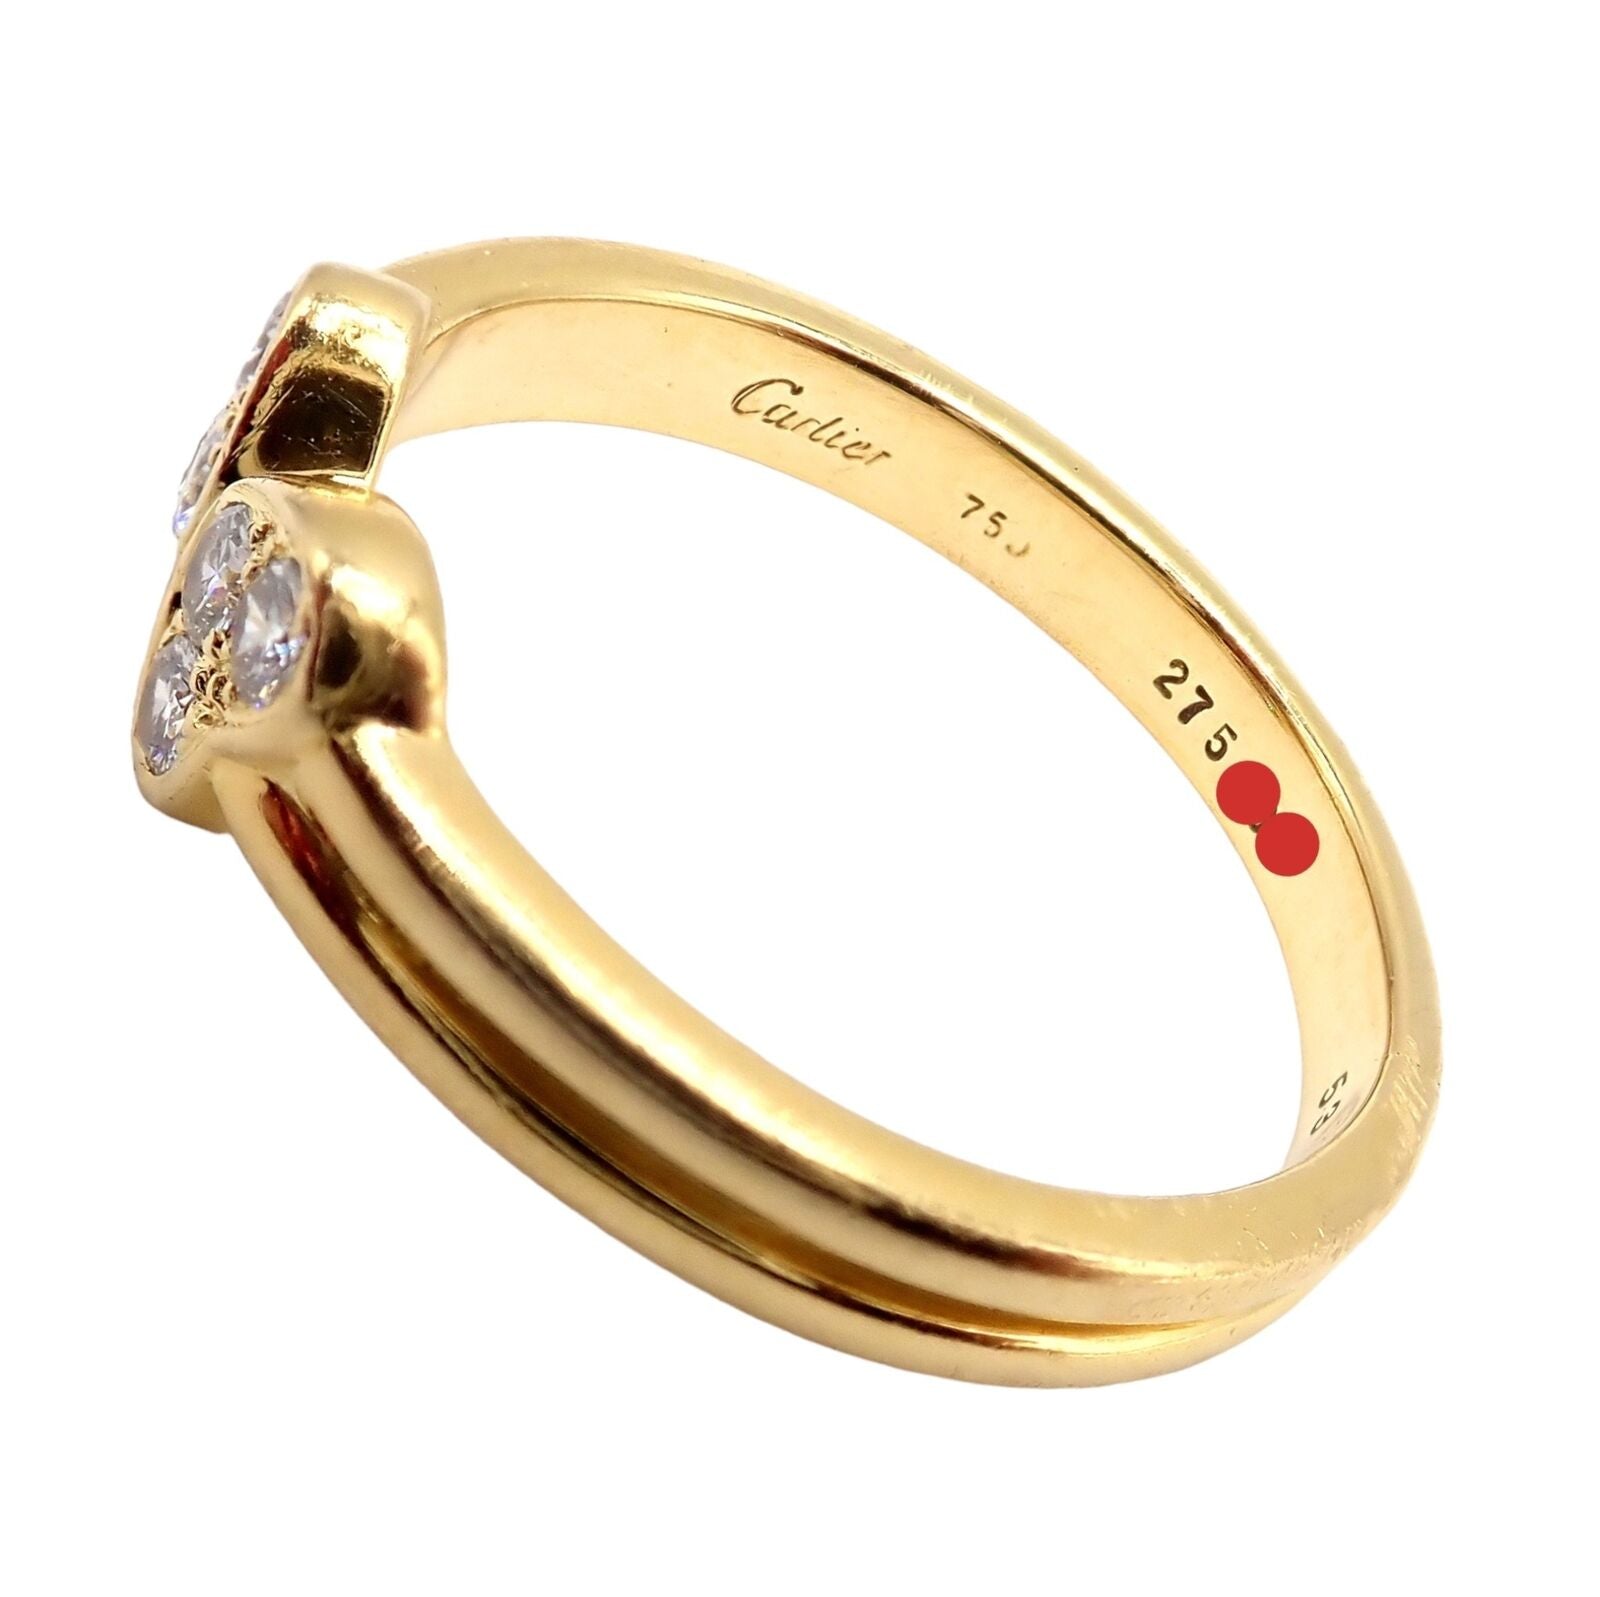 Cartier Jewelry & Watches:Fine Jewelry:Rings Authentic! Cartier Vintage 18k Yellow Gold Dual Love Heart Diamond Ring sz 8